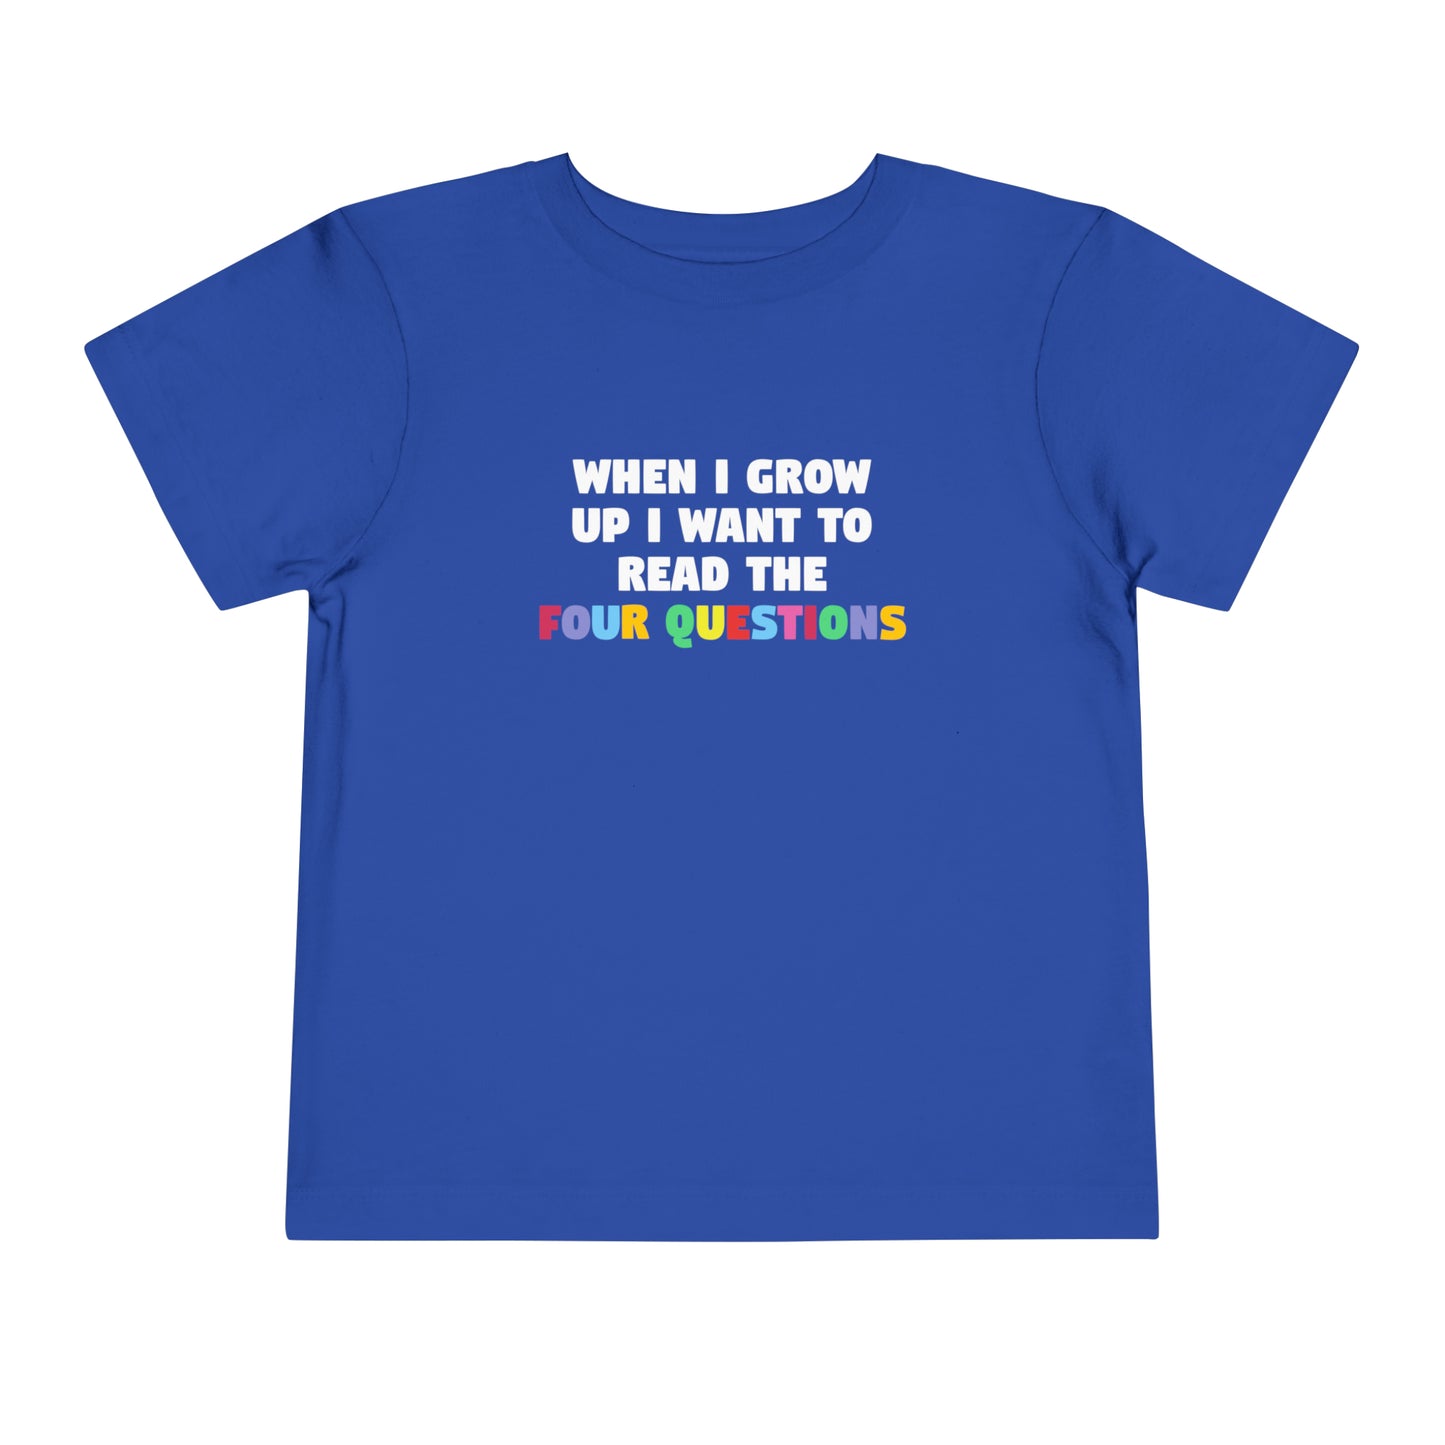 The Four Questions Toddler T-shirt